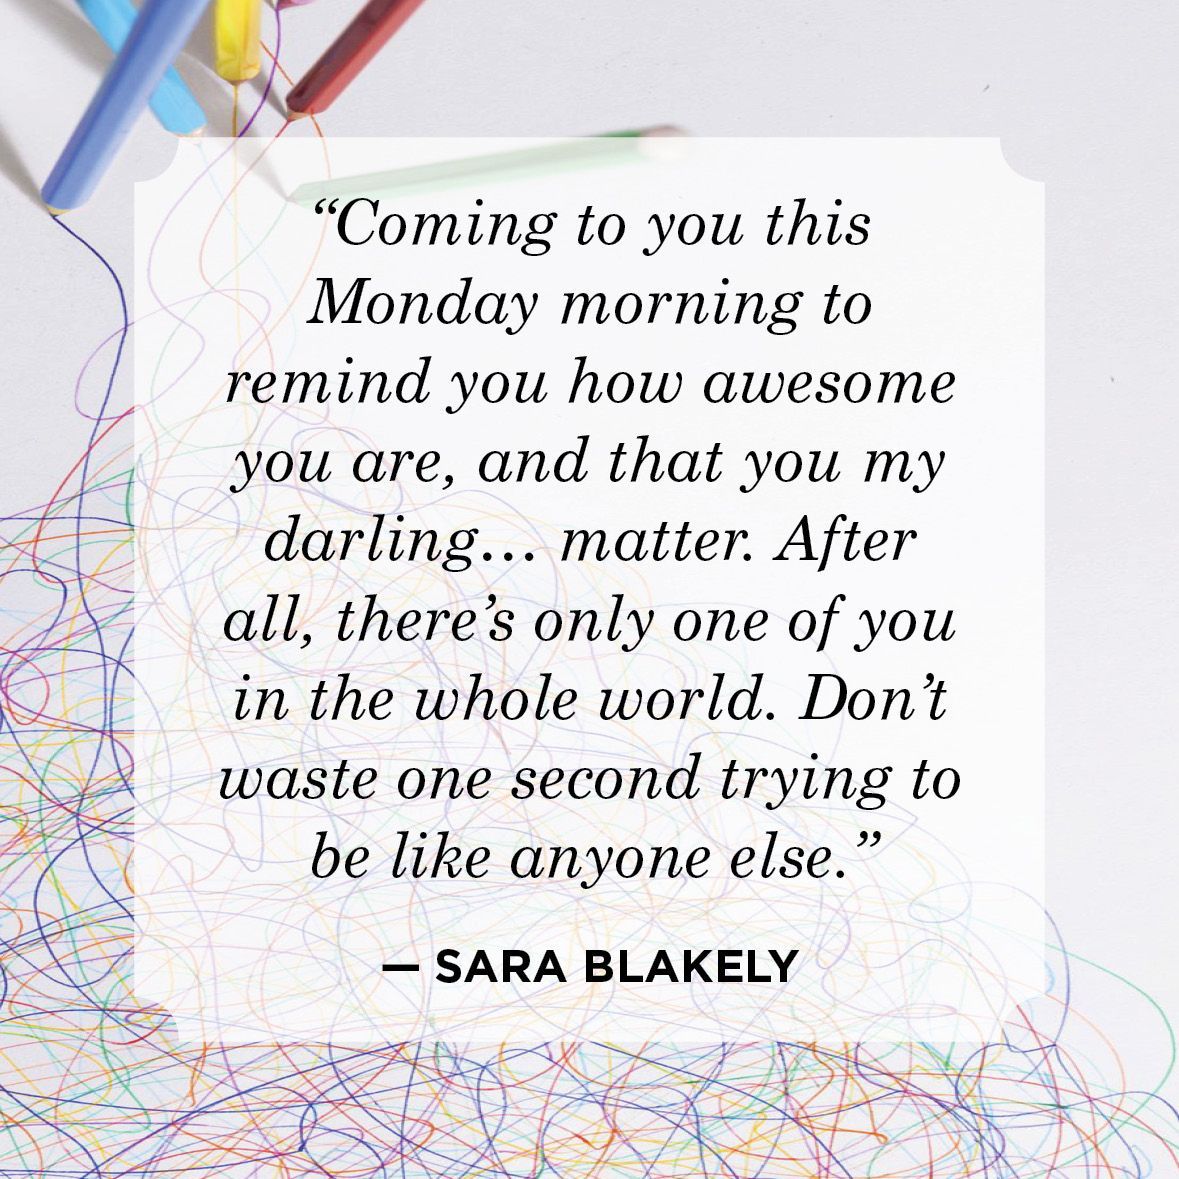 Let's make this Monday the launchpad for a fantastic week ahead! 💼✨ #MondayMotivational #SaraBlakely #UniqueYou #DentalCoaching #PADentists #WVDentists #OHDentist